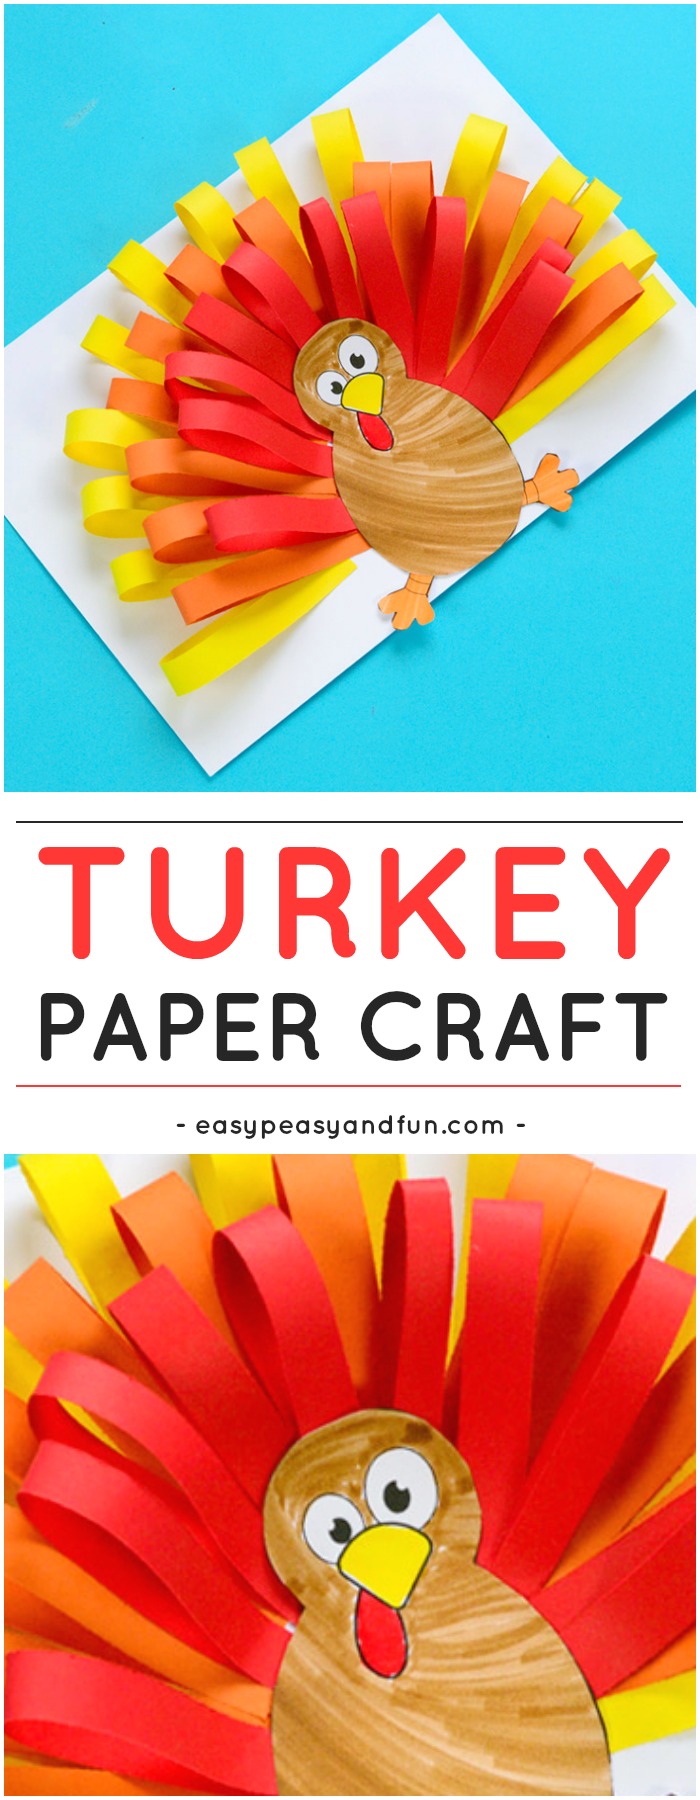 Cute Paper Turkey Craft for Kids. Fun Thanksgiving or Fall activity for kids to make.